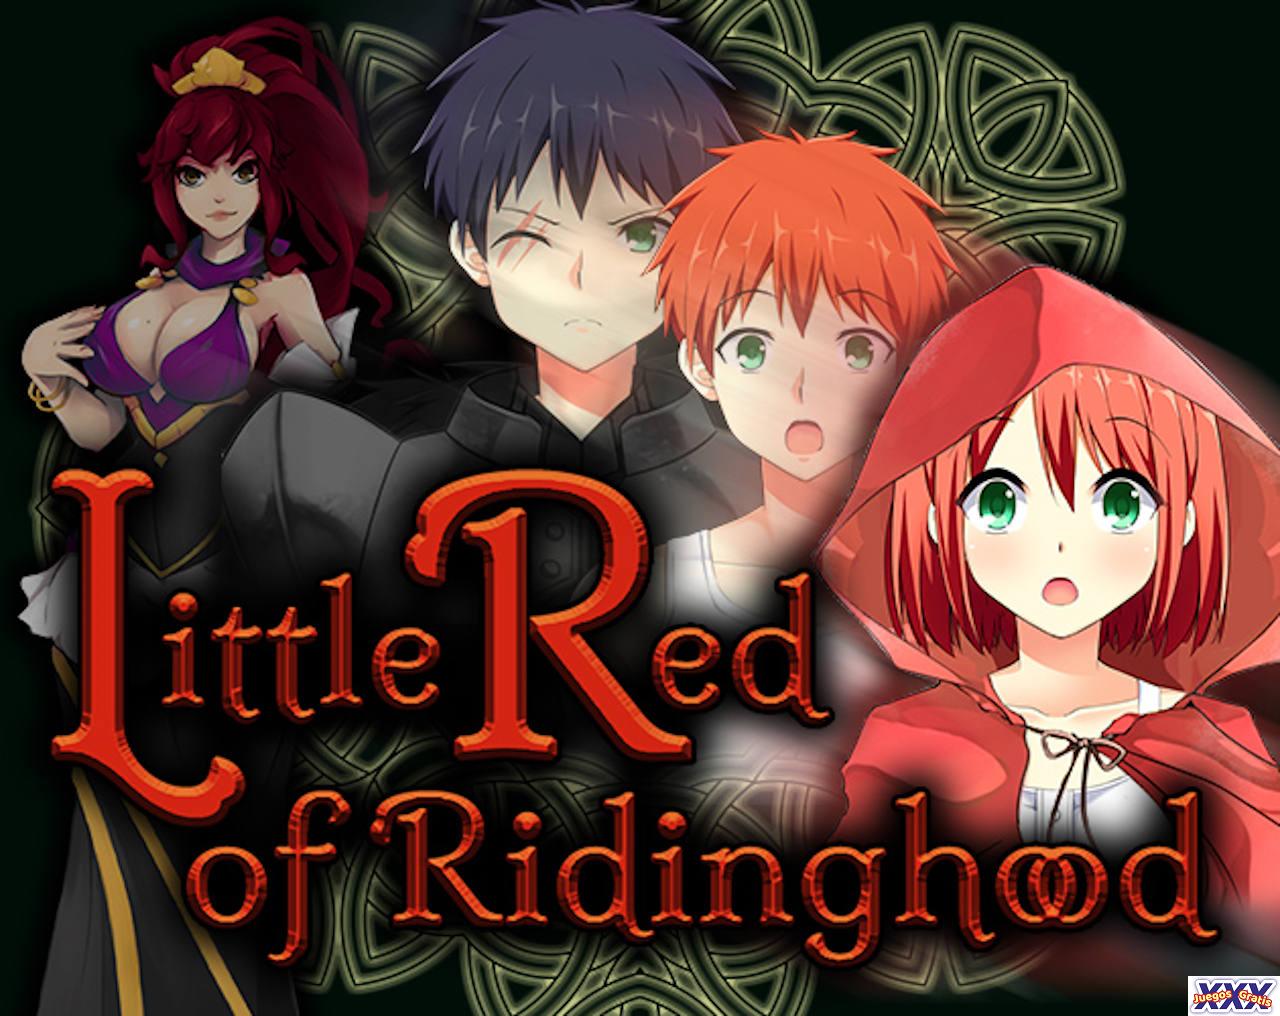 LITTLE RED OF RIDINGHOOD [DESIDEE GAMES] [FINAL VERSION]